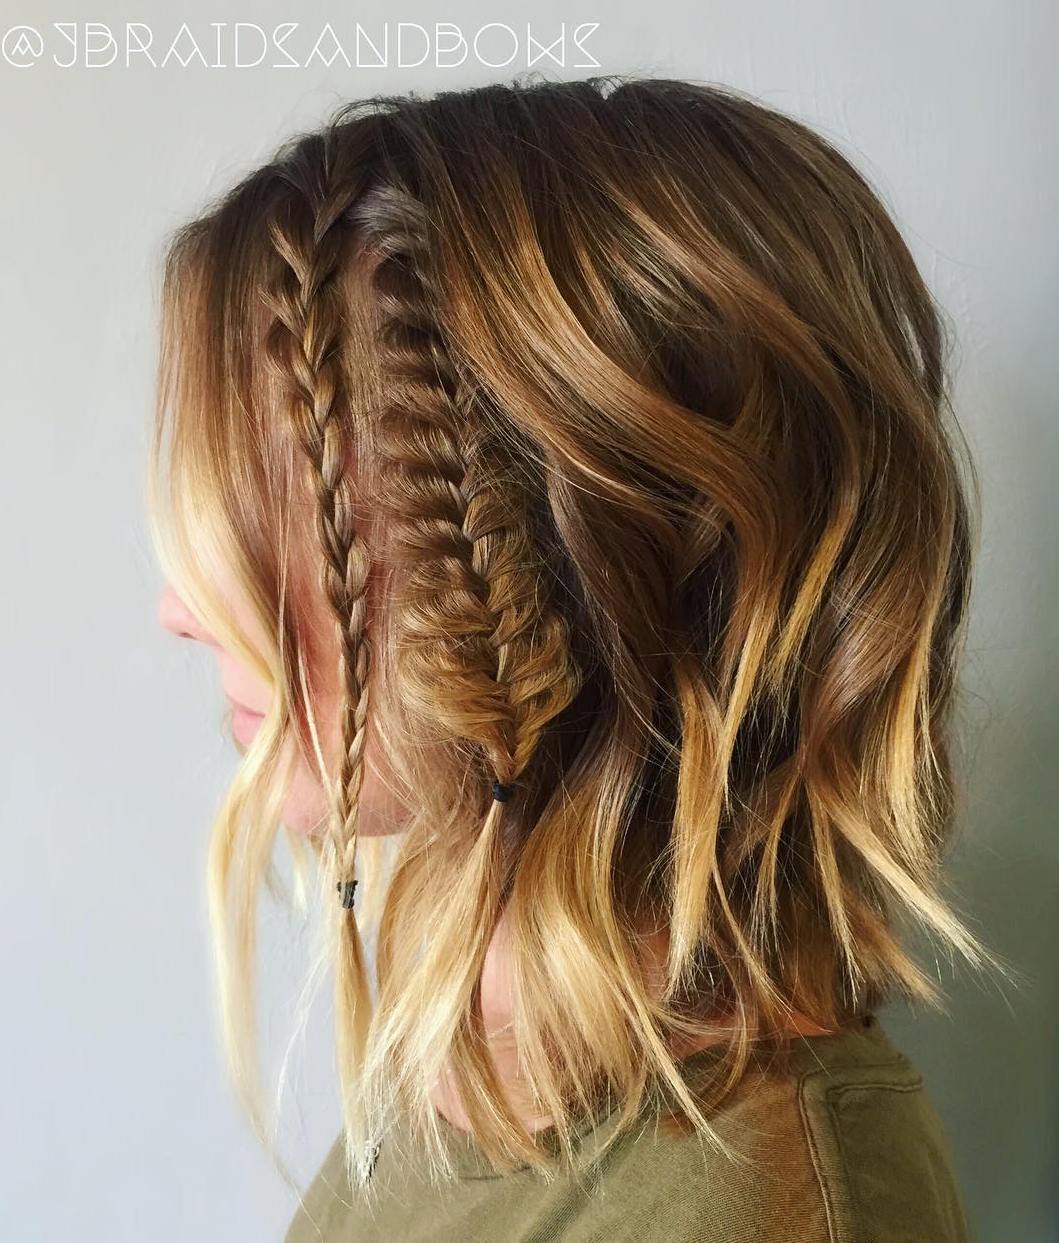 20 Easy Hairstyles for the Fabulous Girl on the Go